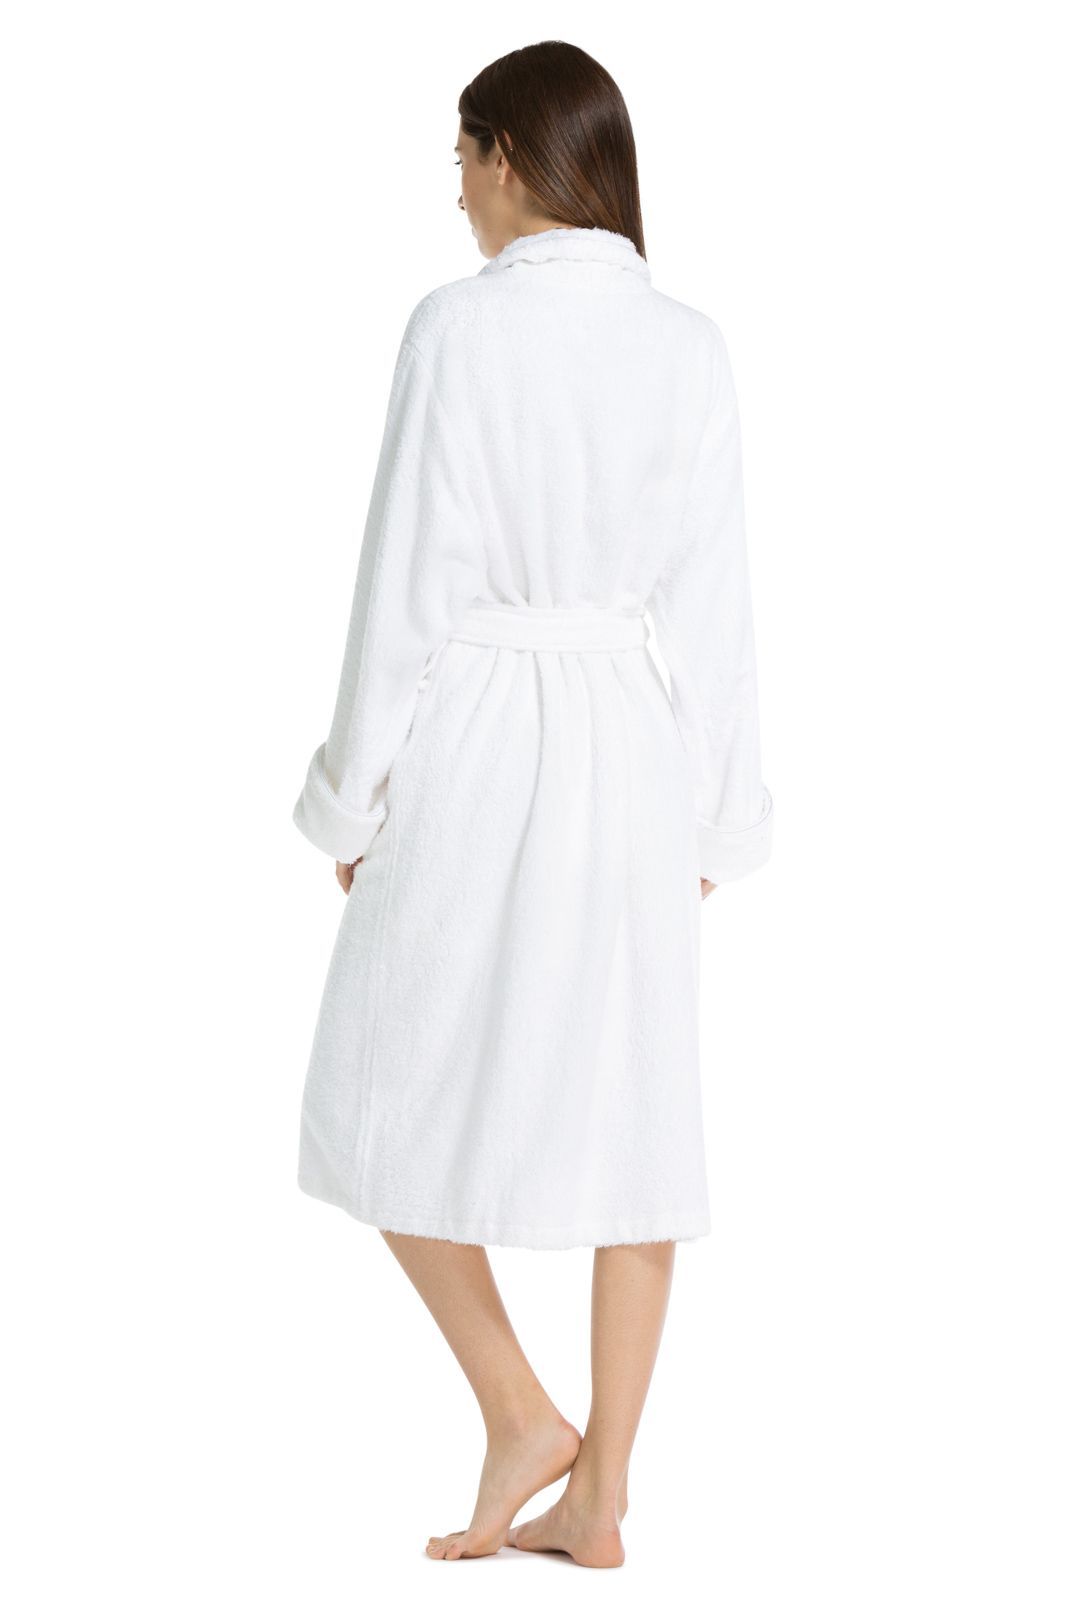 terry cloth robes